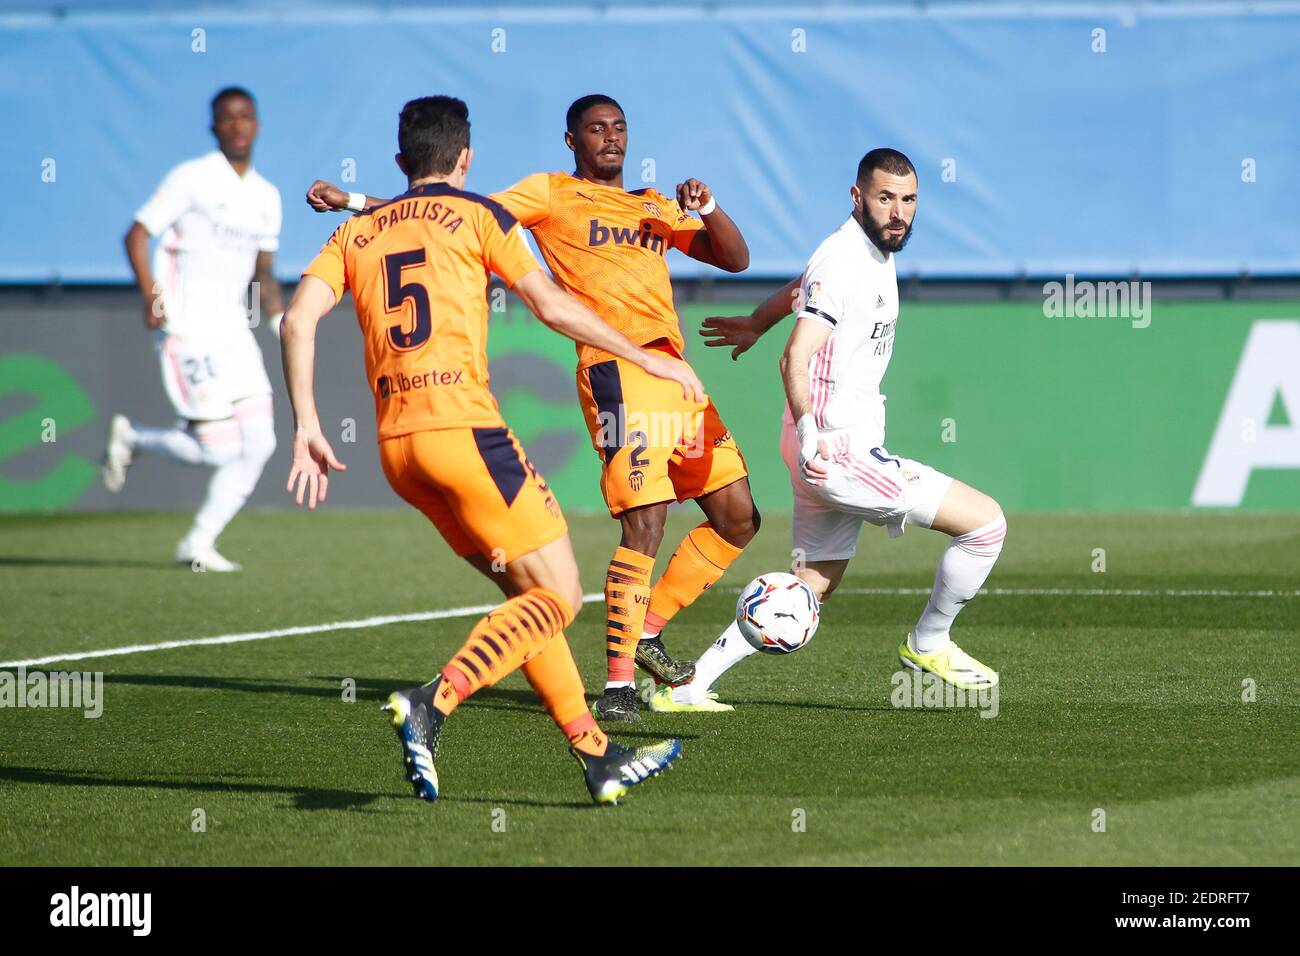 Karim Benzema of Real Madrid and Thierry Correia, Gabriel Paulista of Valencia in action during the Spanish championship La Lig / LM Stock Photo